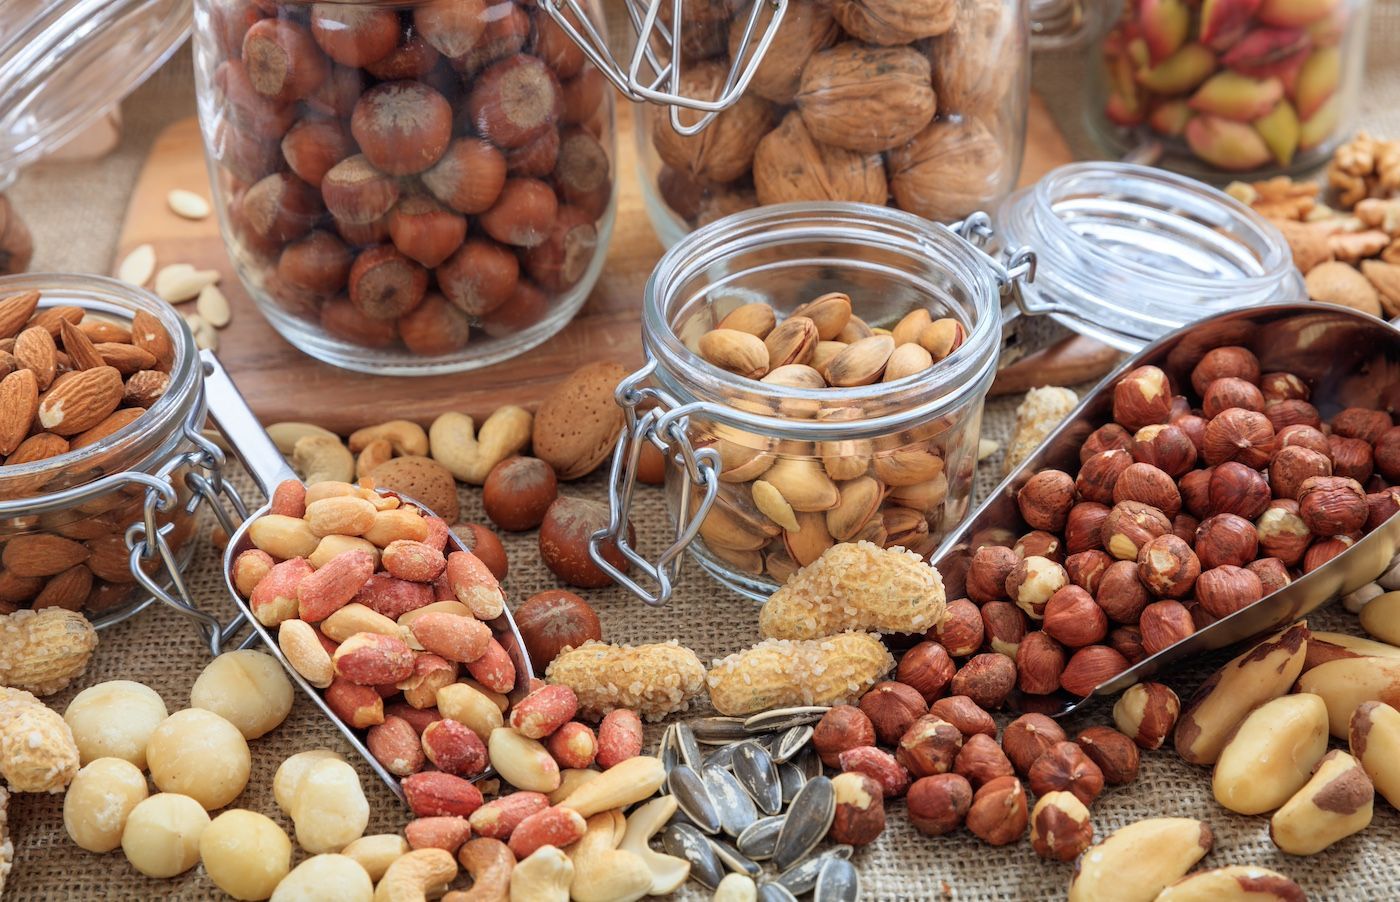 Nuts, a Favored Snack, Versatile on Various Diets, Provide Health Benefits Despite High Fat Content.